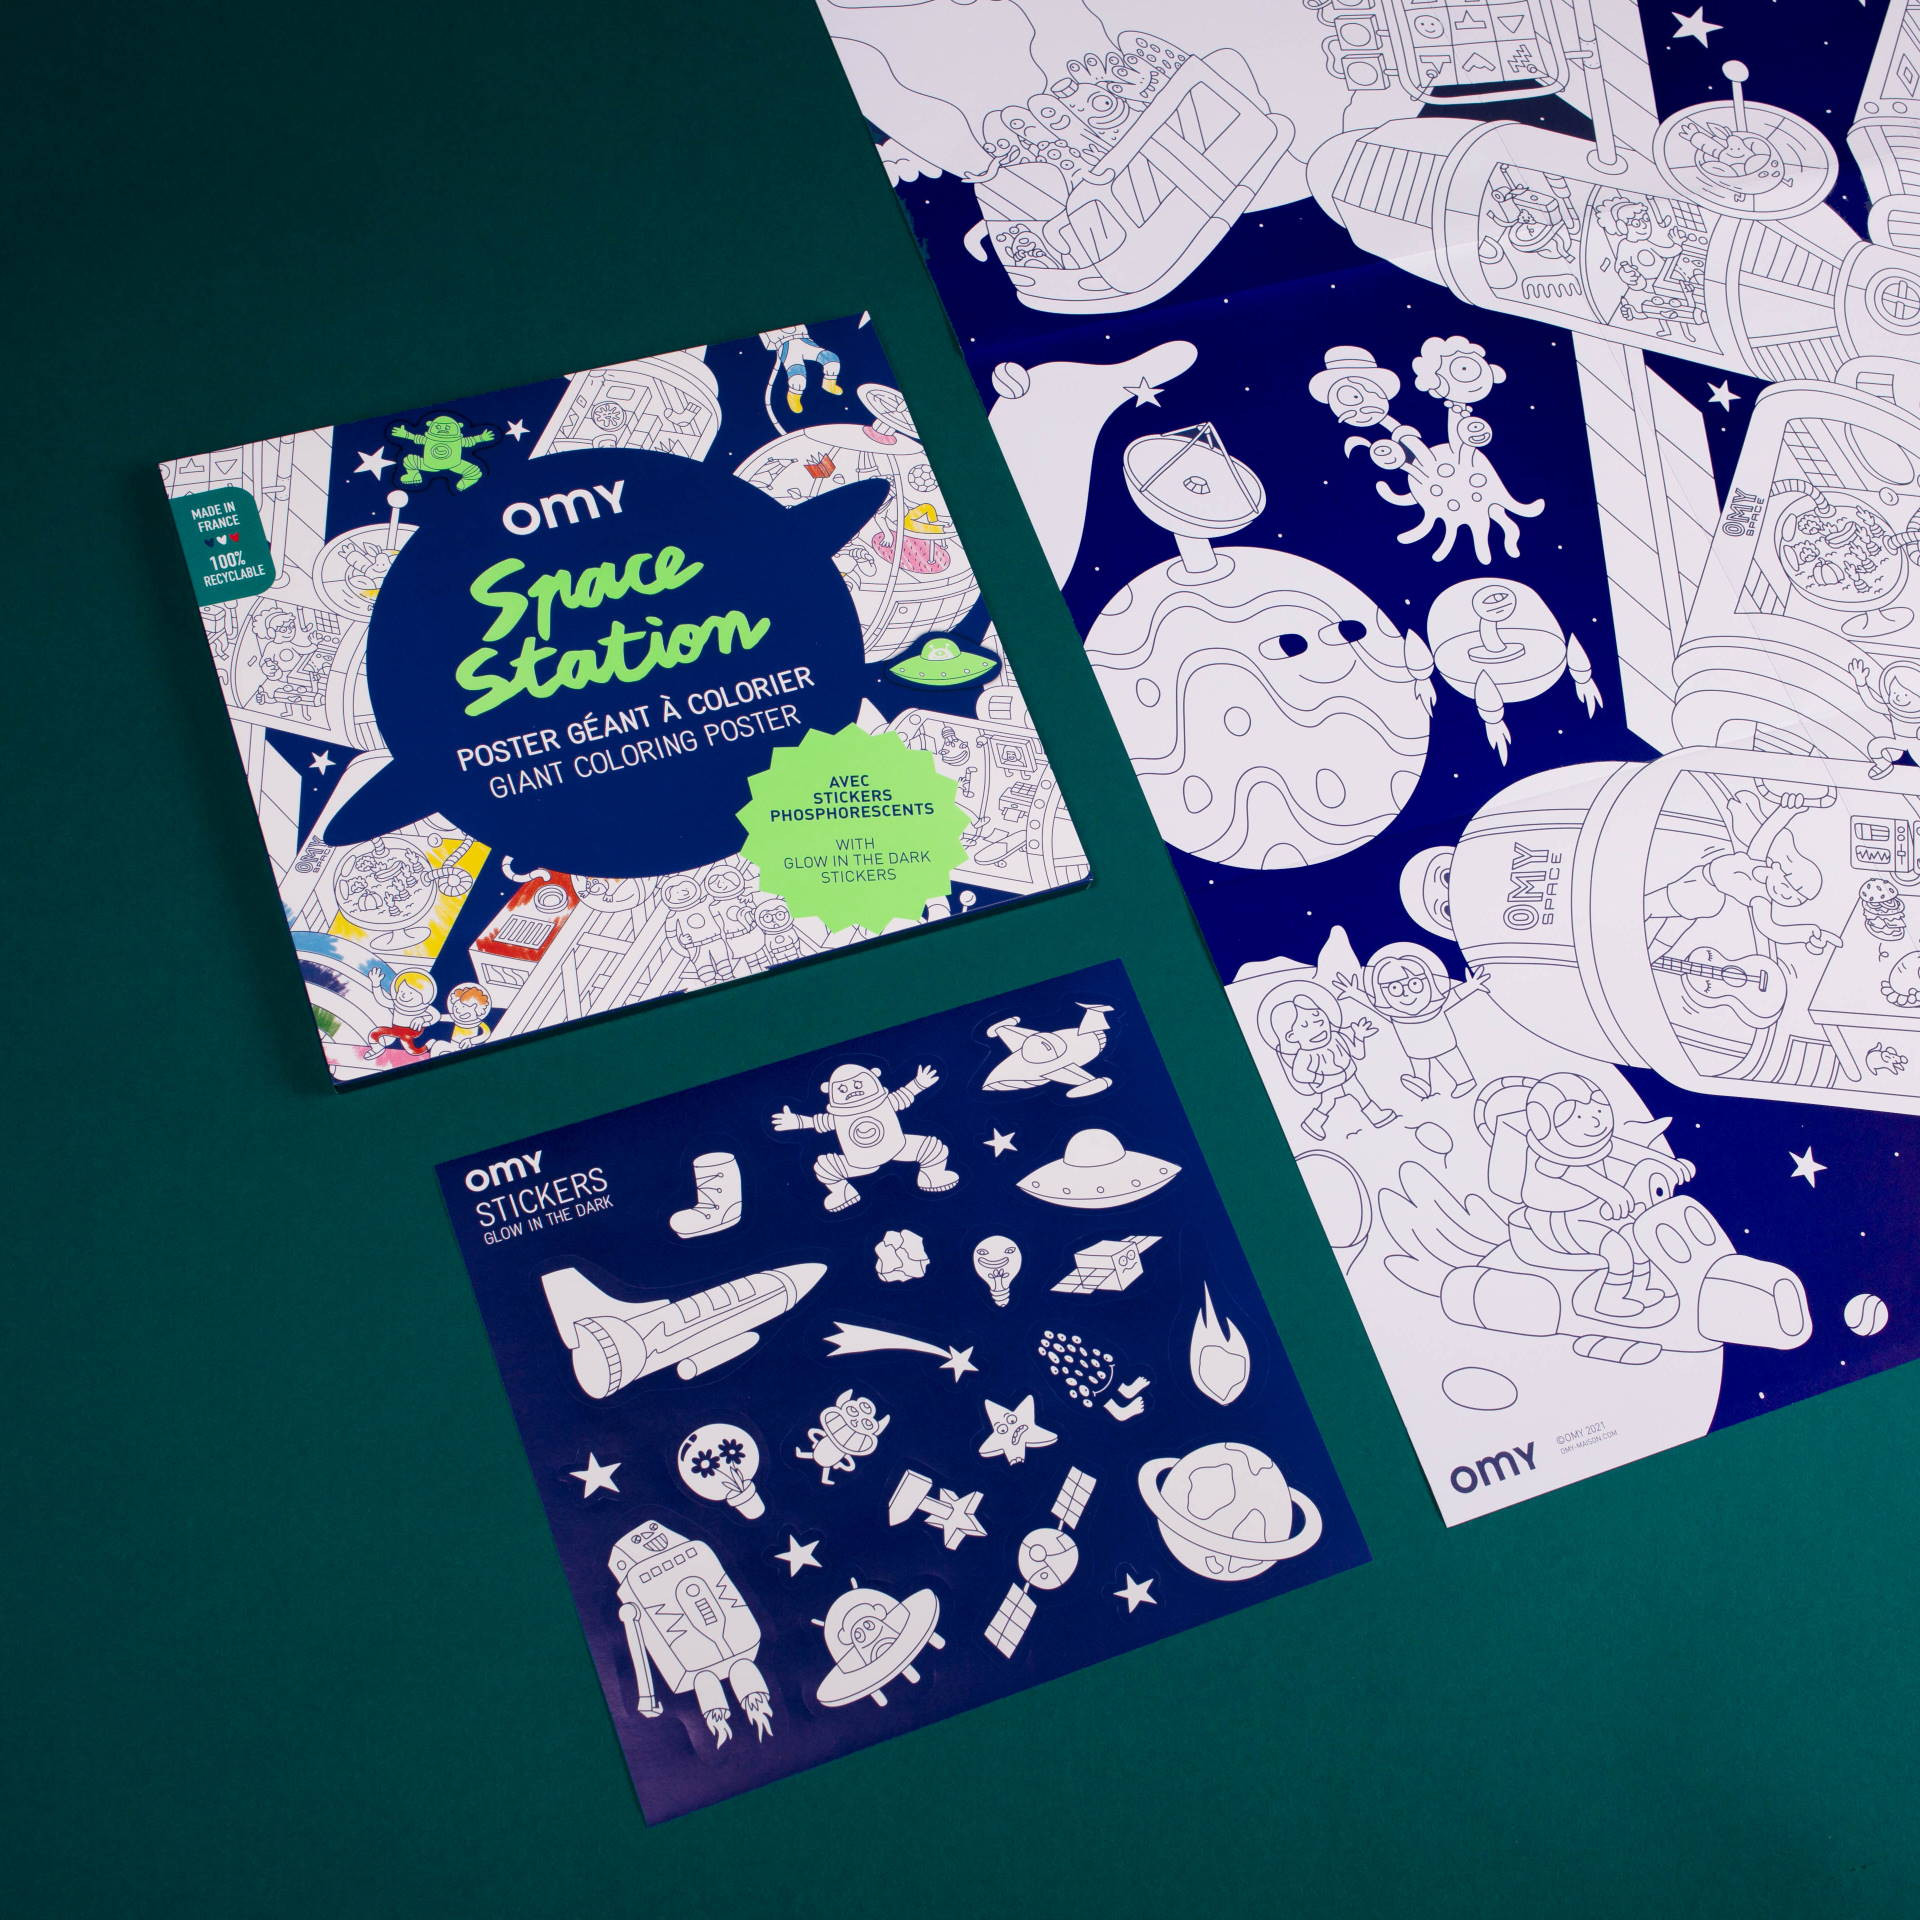 Giant Colouring Poster and stickers - Space Station - OMY